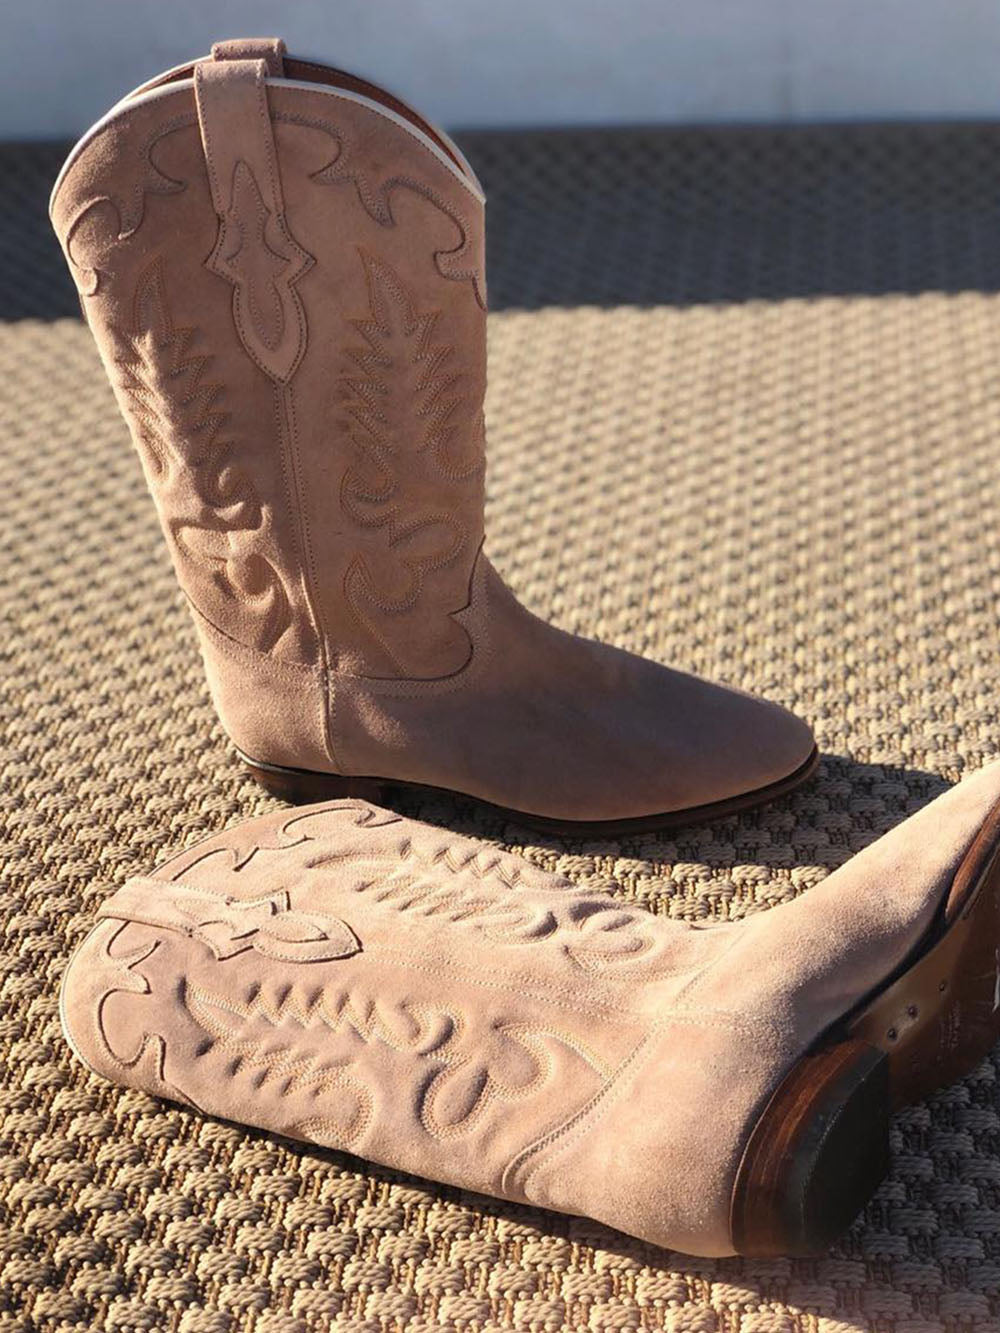 MIDNIGHT NUDE COWBOY BOOTS